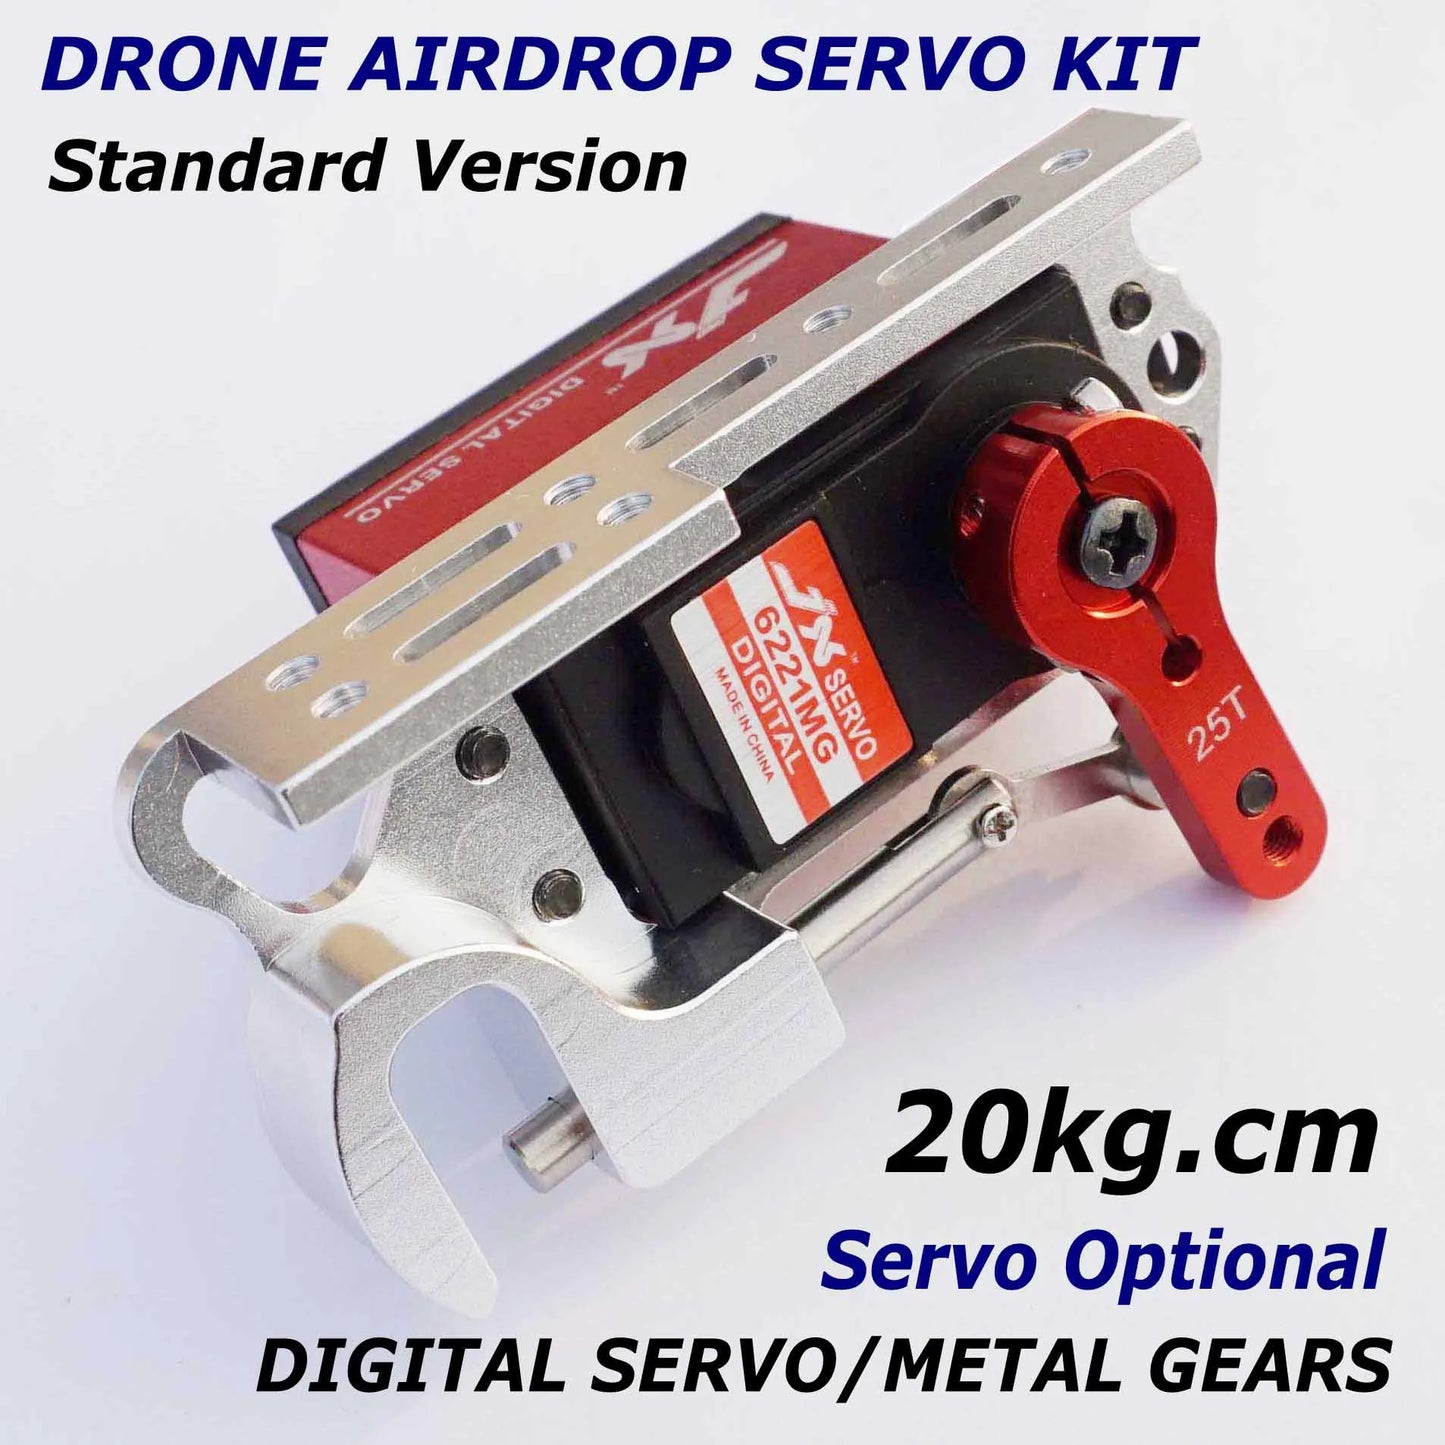 JX Servo 20kg Digital Airdrop - Drop Switch Goods Release Device Releaser for RC Multimotor Drone Airplane Airdrop DIY KIT